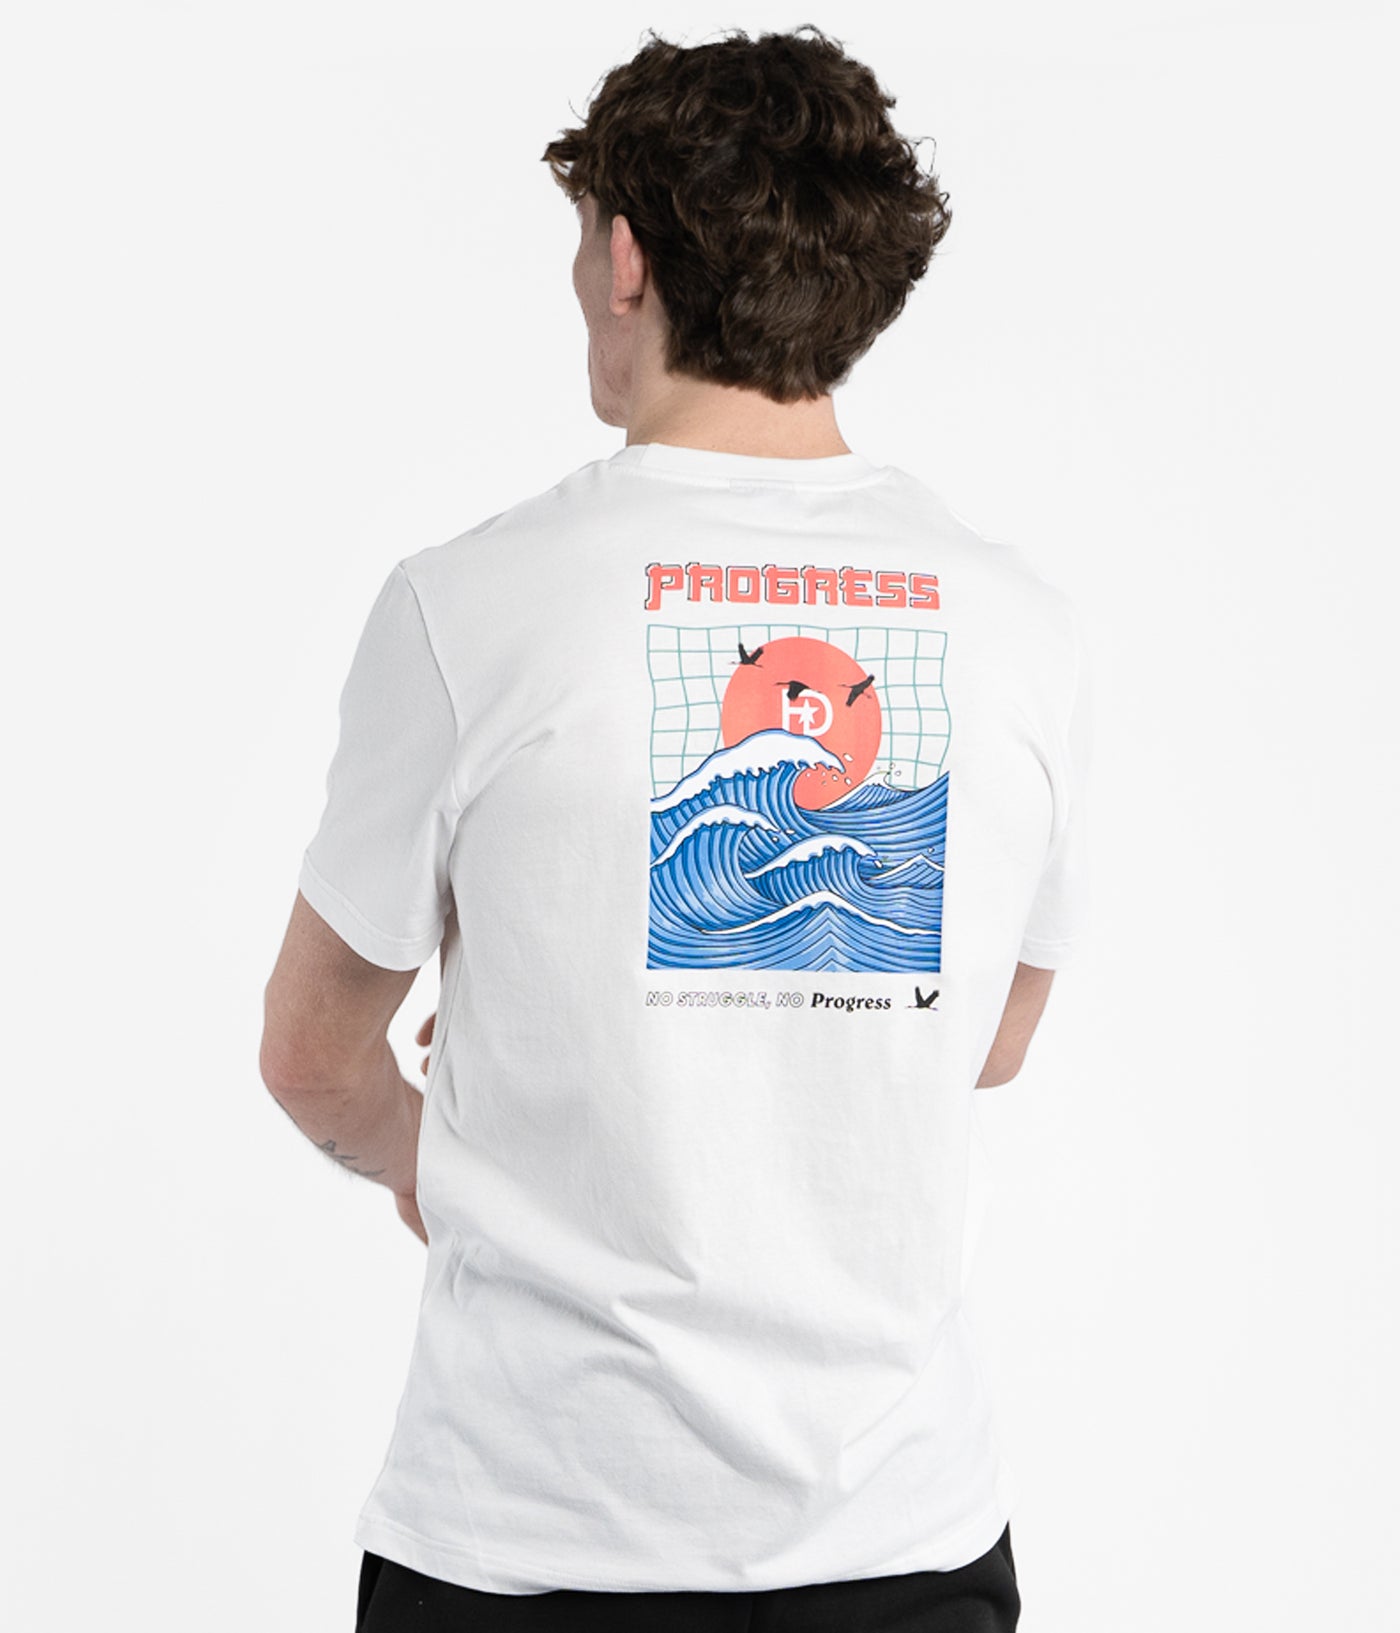 Why choose a Great Wave Tee?